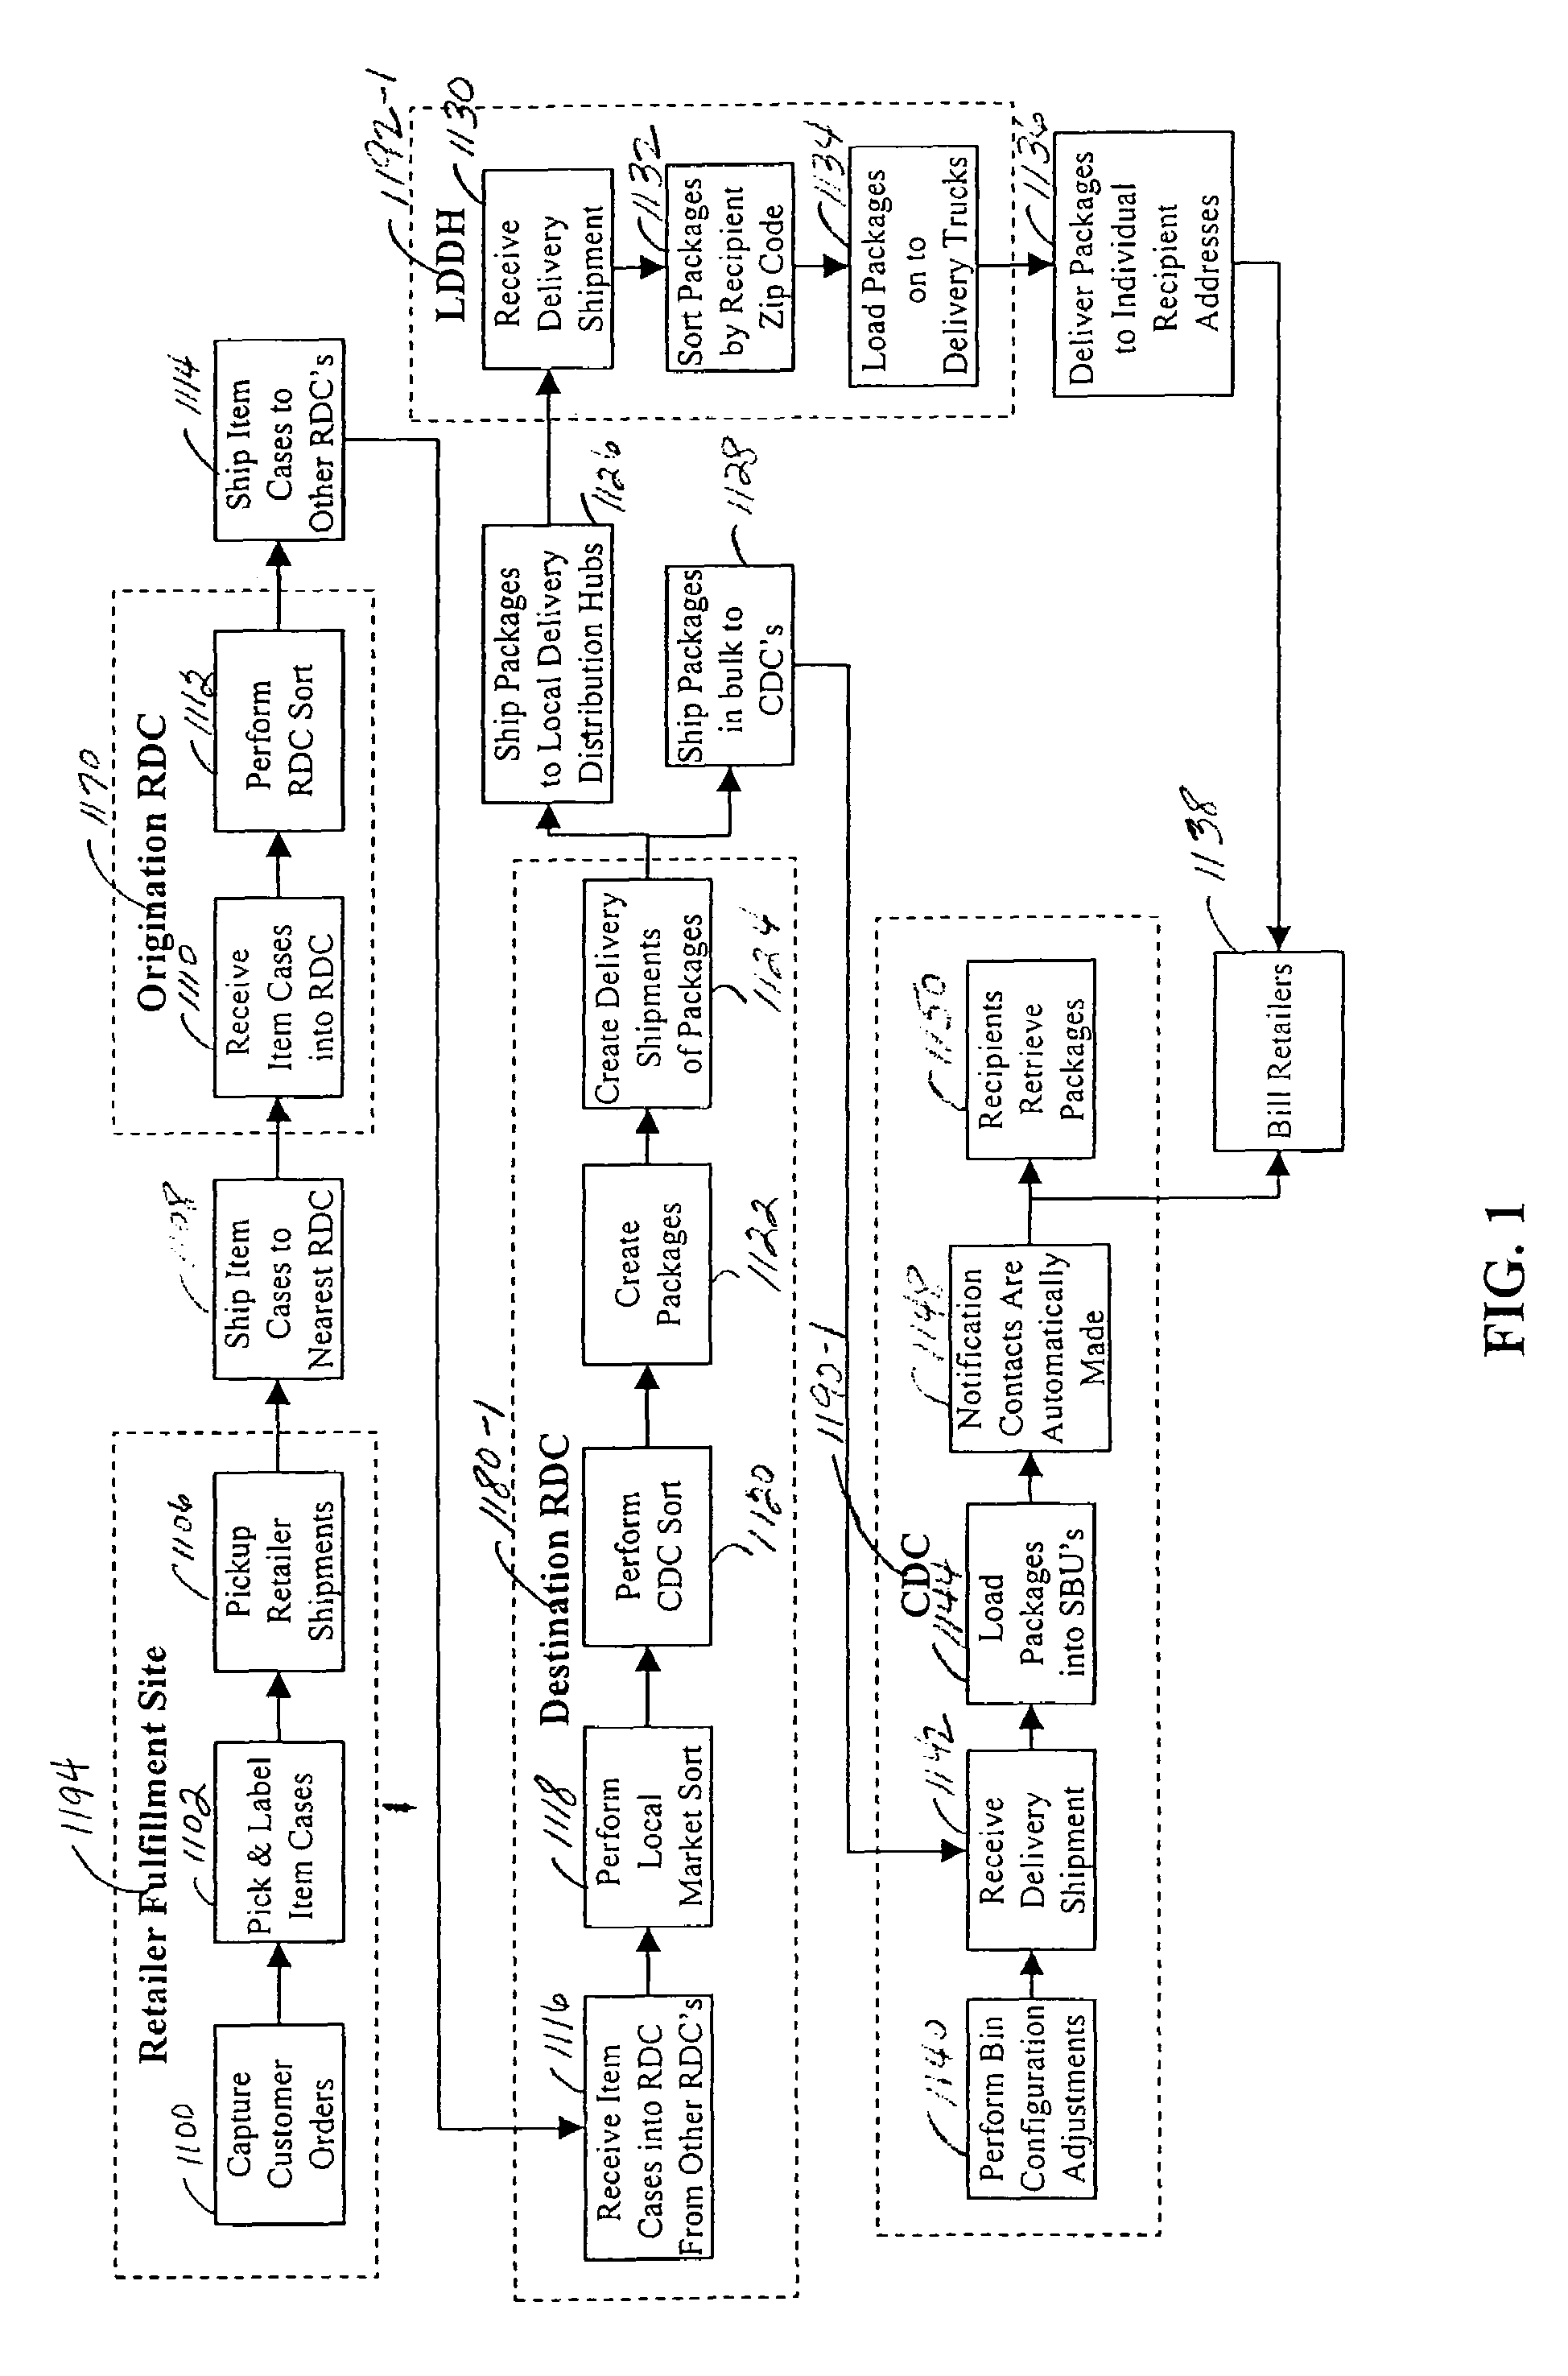 Method and system for efficient package delivery and storage